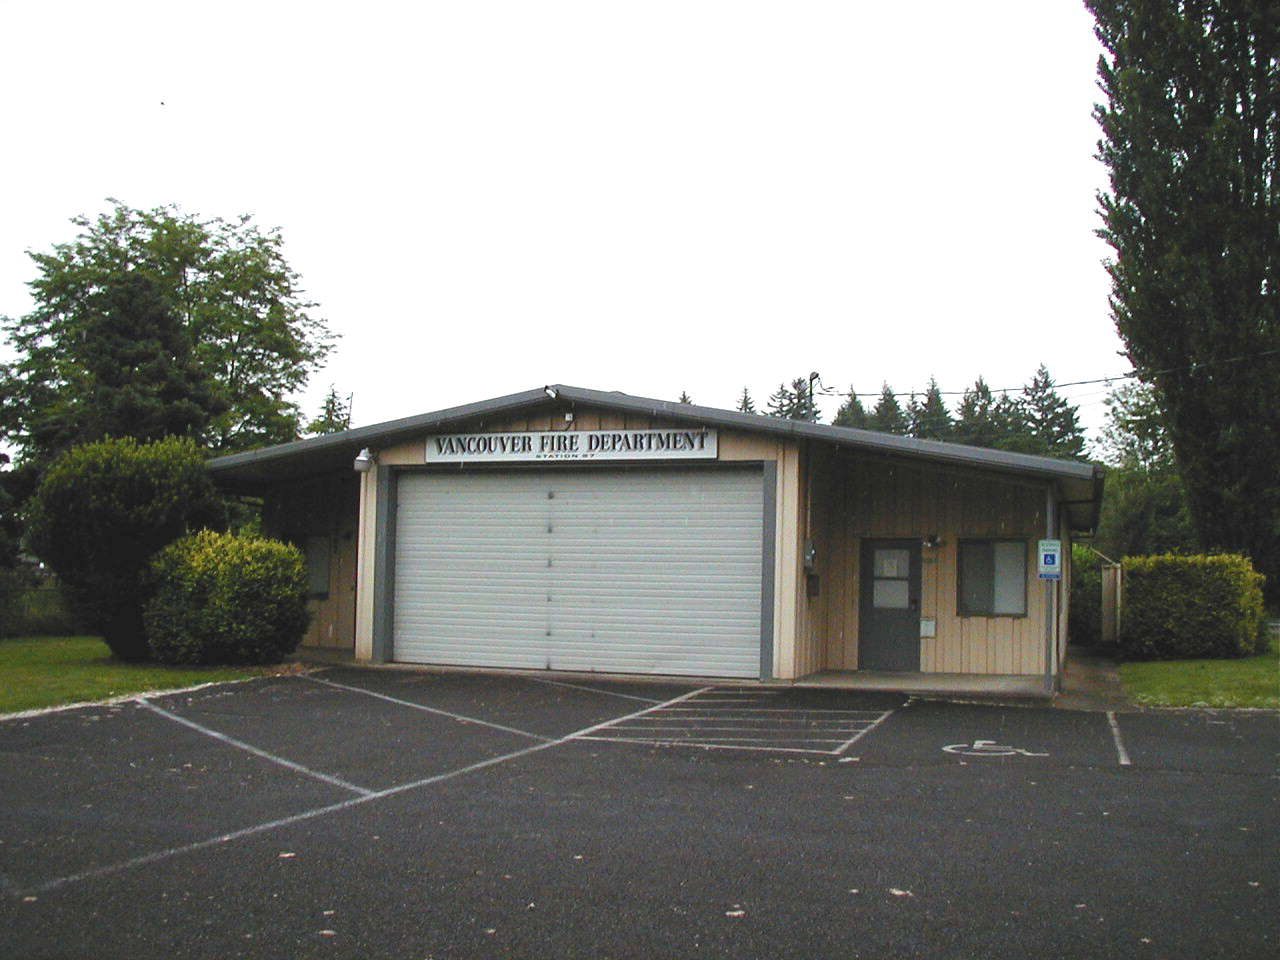 Clark County Asssessor
Vancouver has approved the sale of the former Fire Station 87 at 11207 N.E. 70th Ave., near Northeast St. Johns Road and 72nd Avenue.